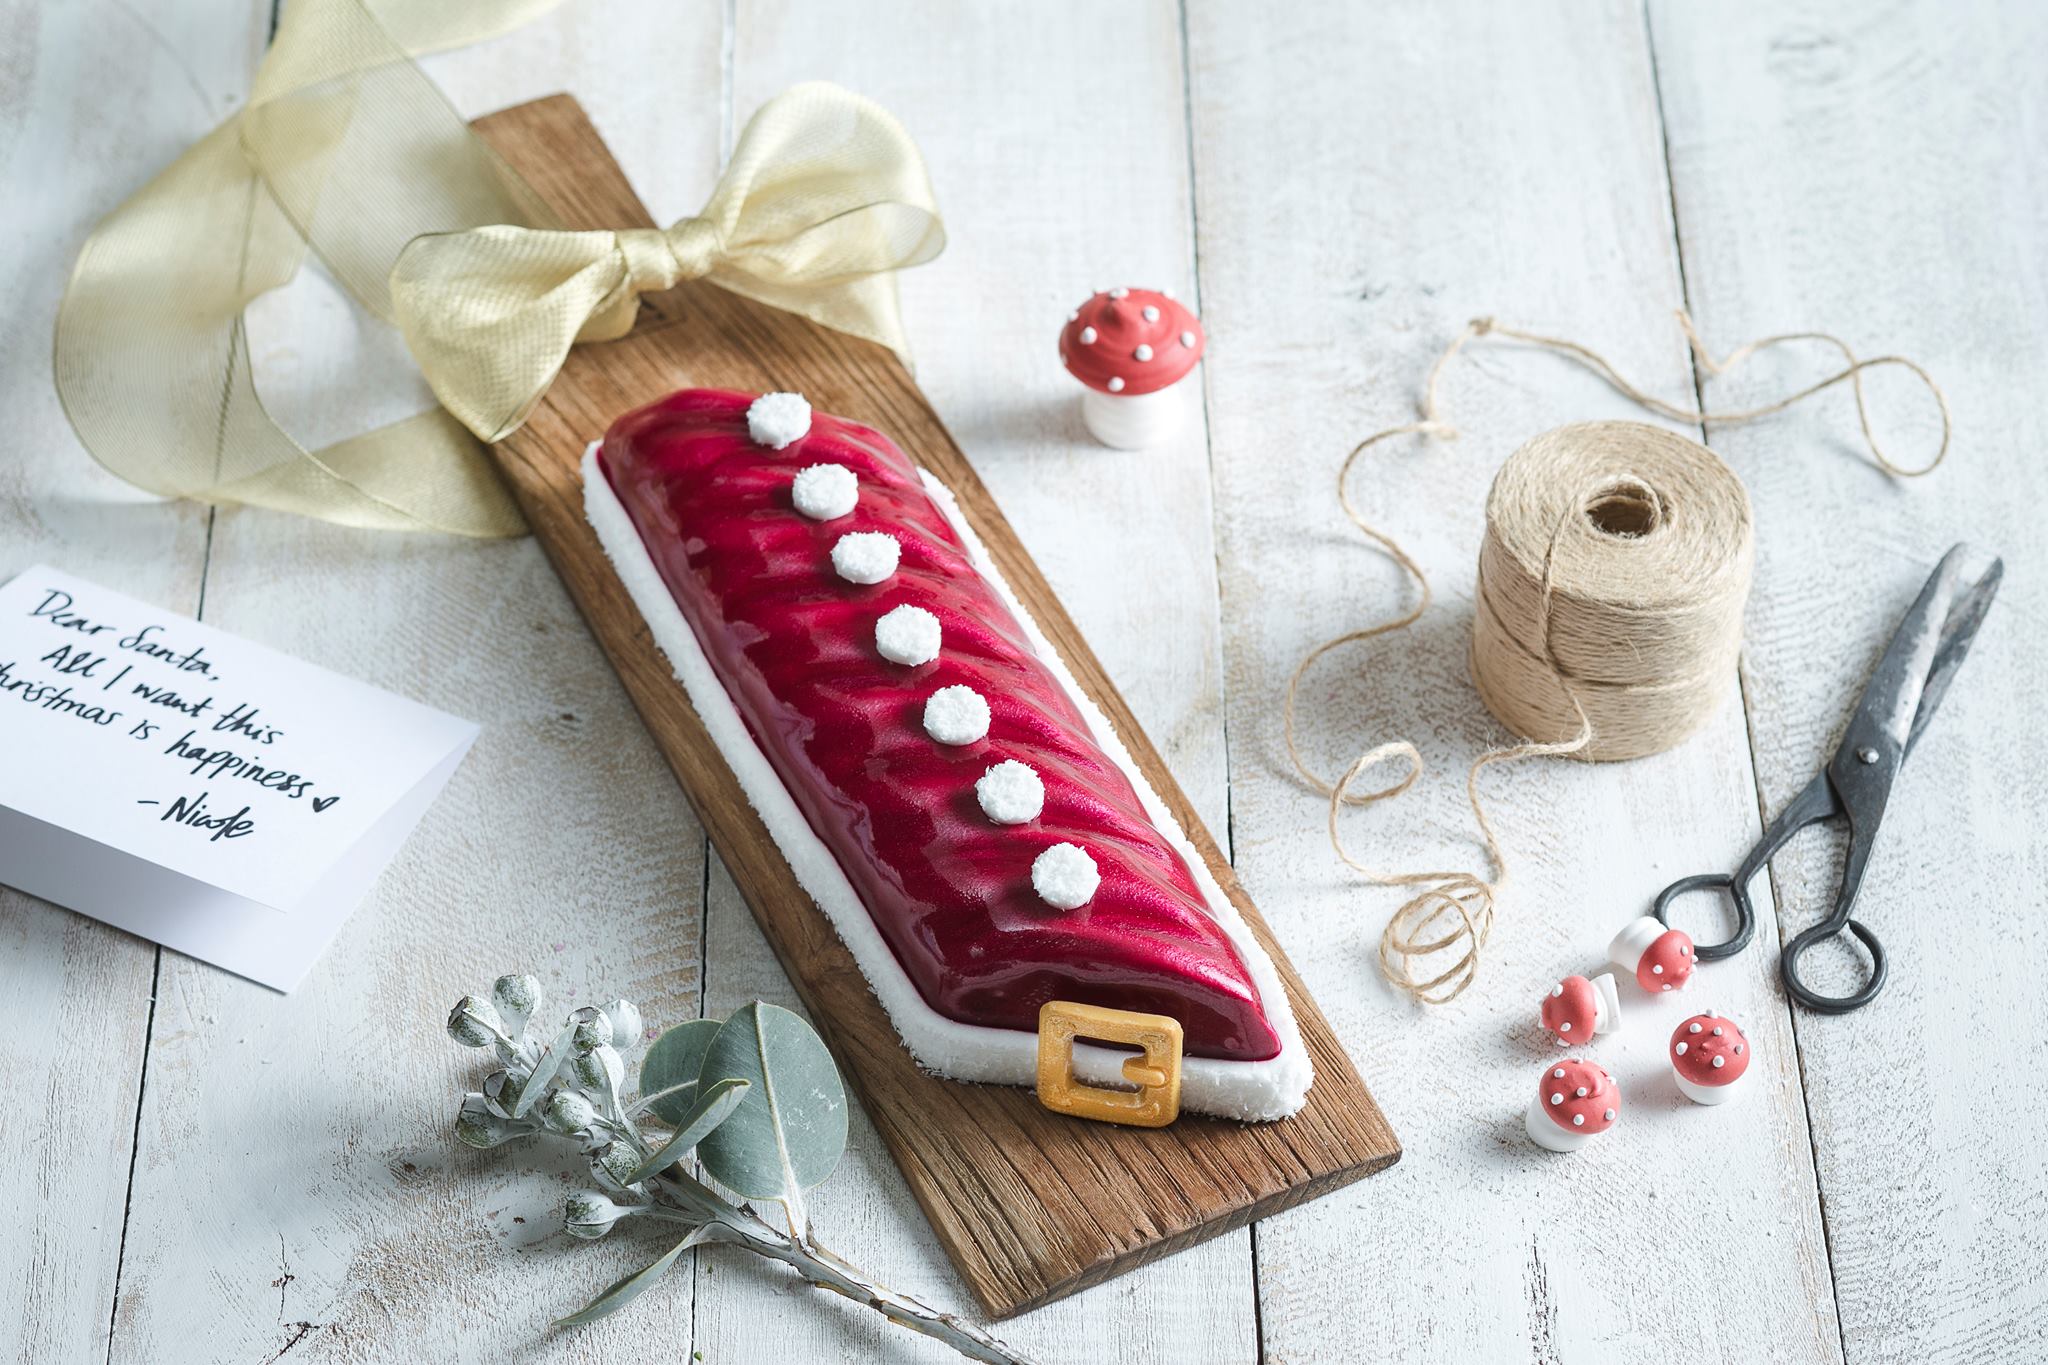 The most whimsical Christmas log cakes to admire then devour